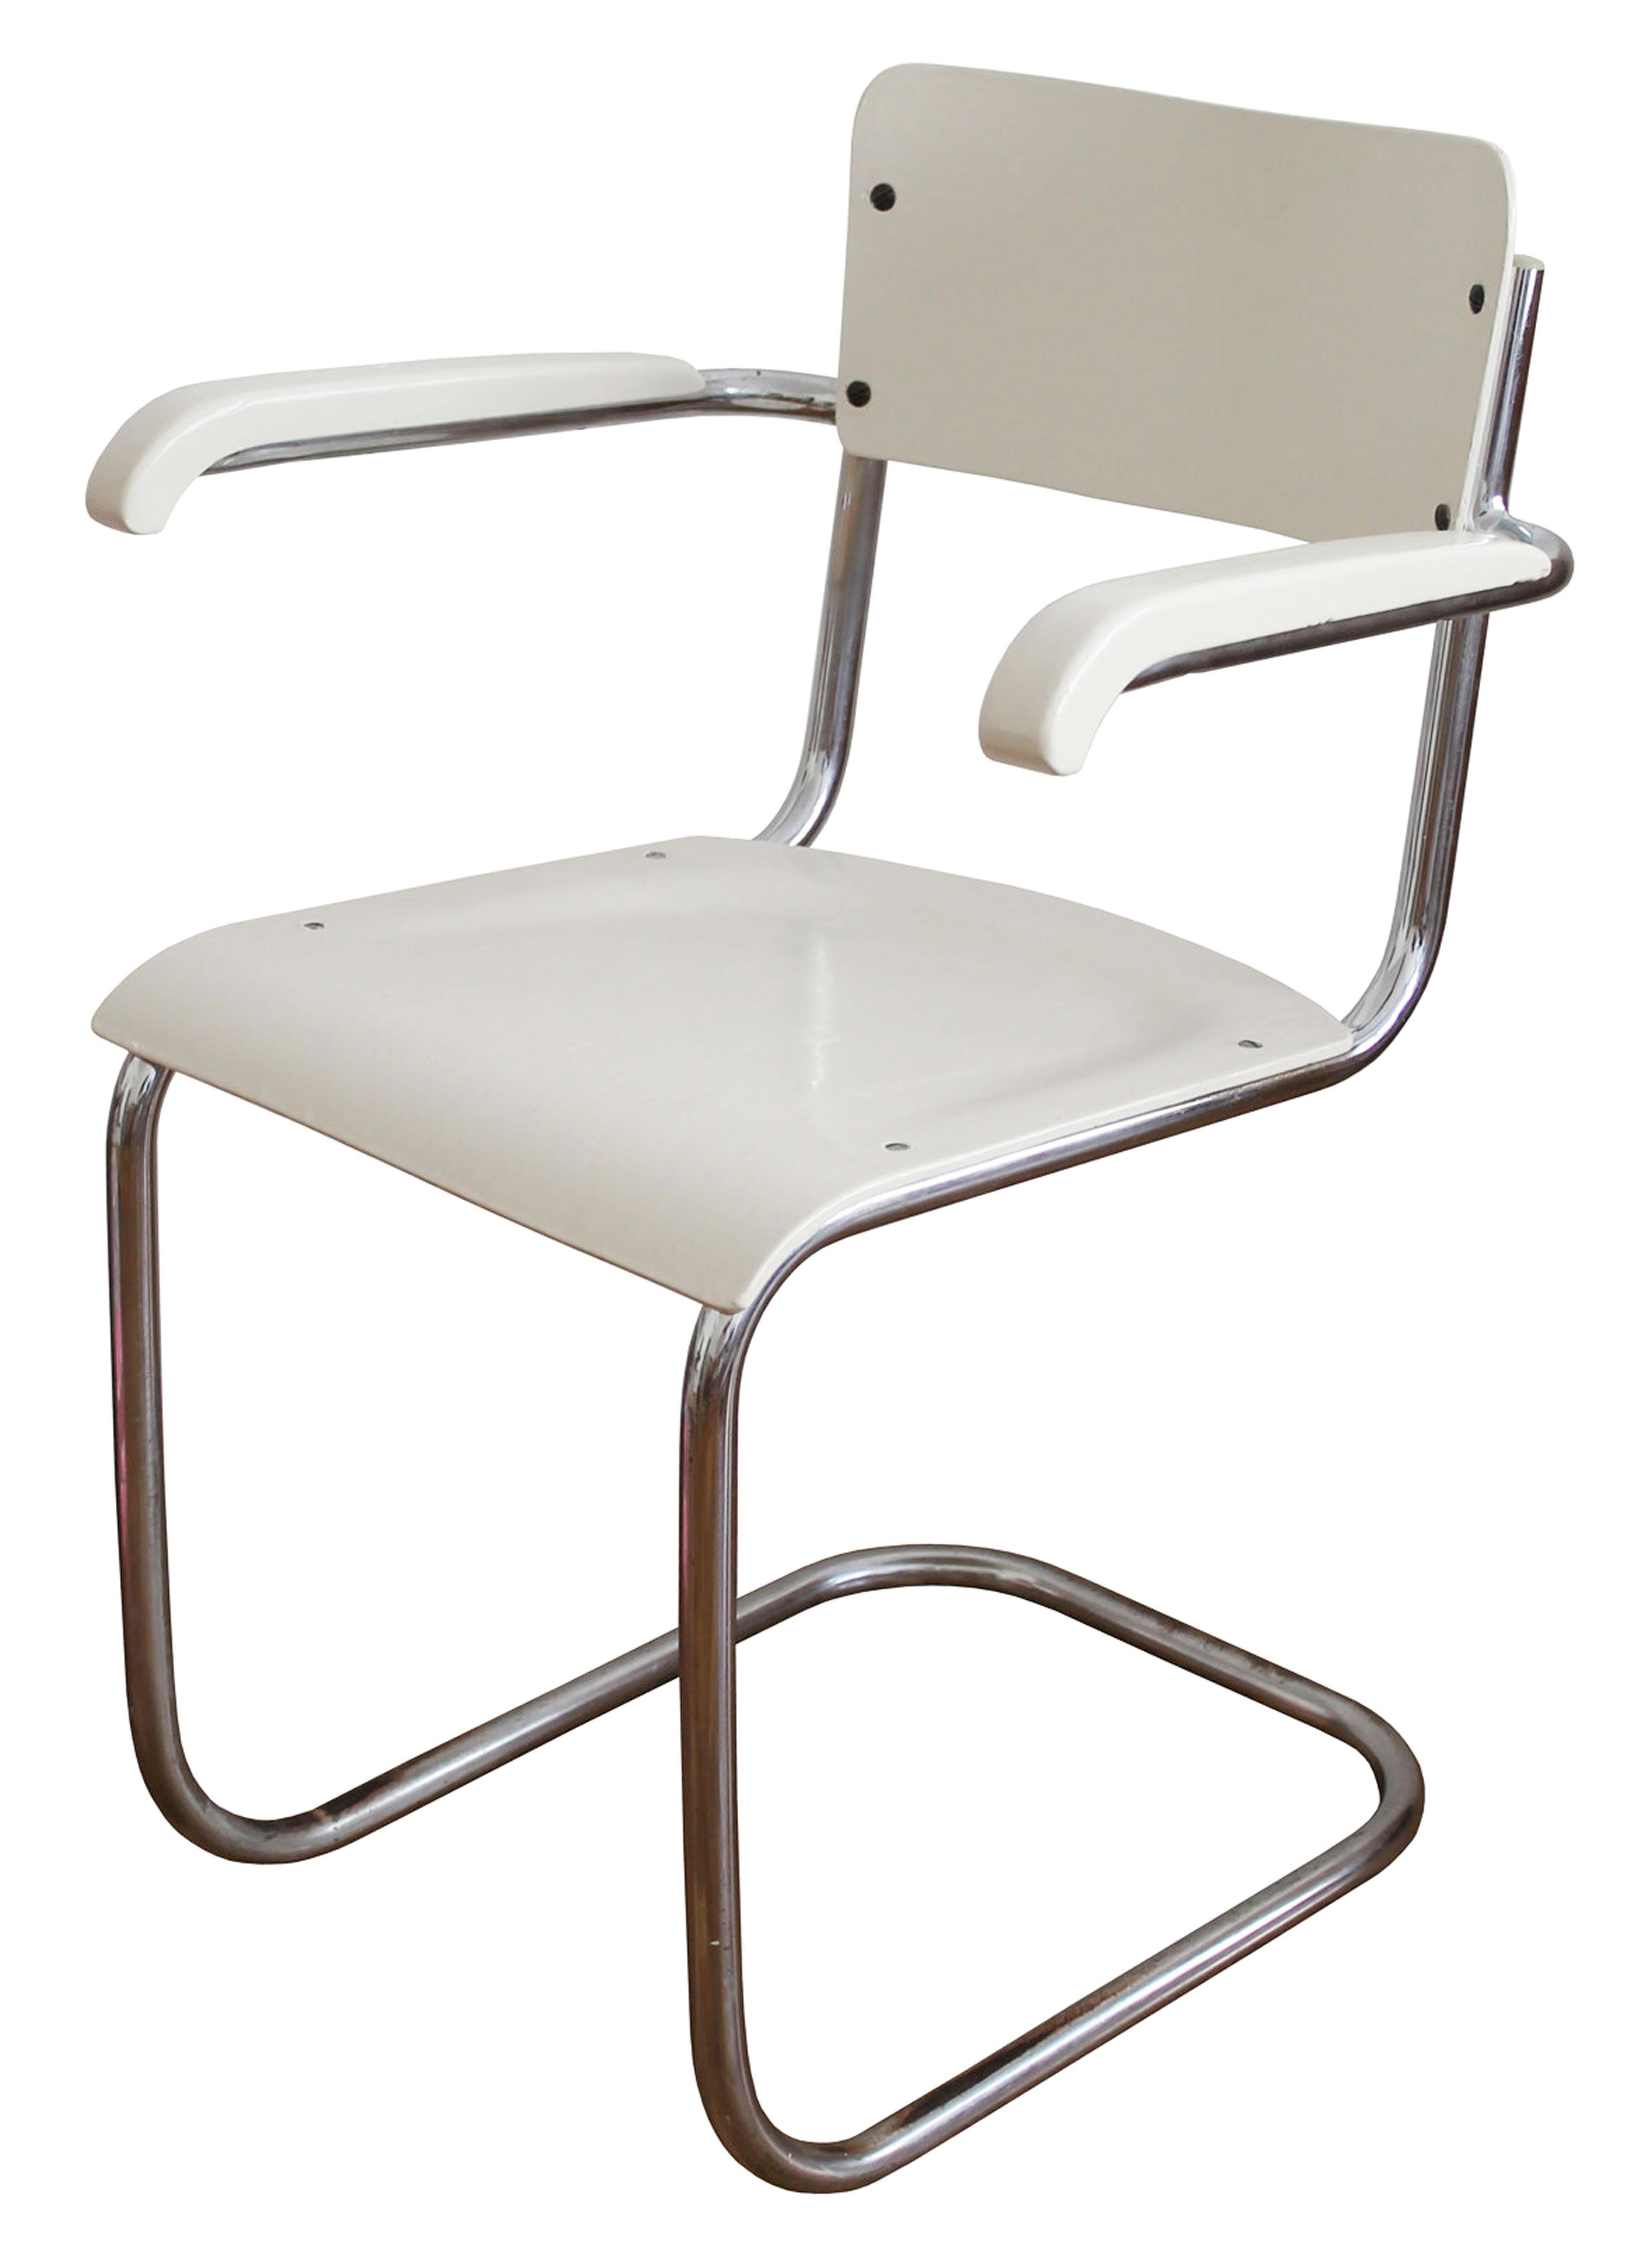 This piece is truly a great example of the radical Bauhaus aesthetic. Simple and functional, it perfectly represents the ethos of the avant-garde movement.

The tubular cantilevered chair was originally designed by the famous Dutch modernist